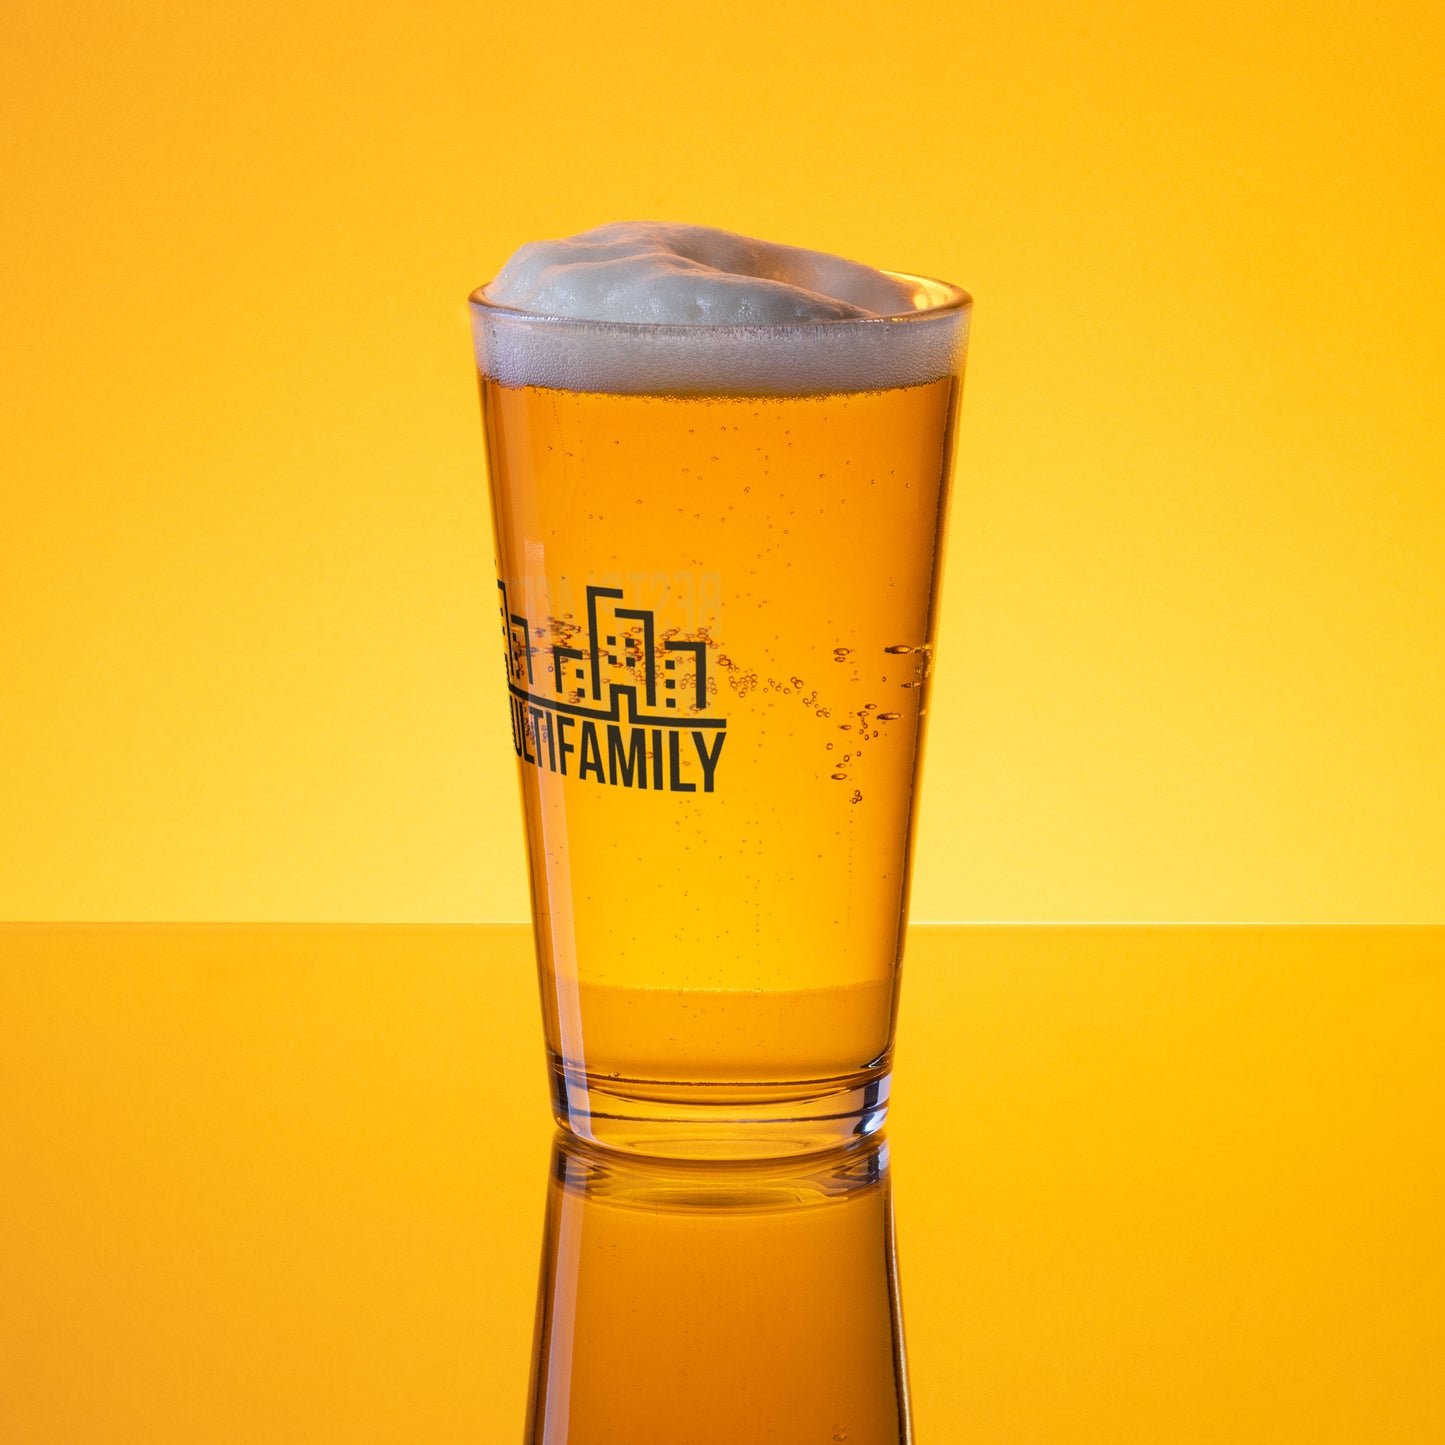 Best Places to Work Multifamily® Shaker pint glass